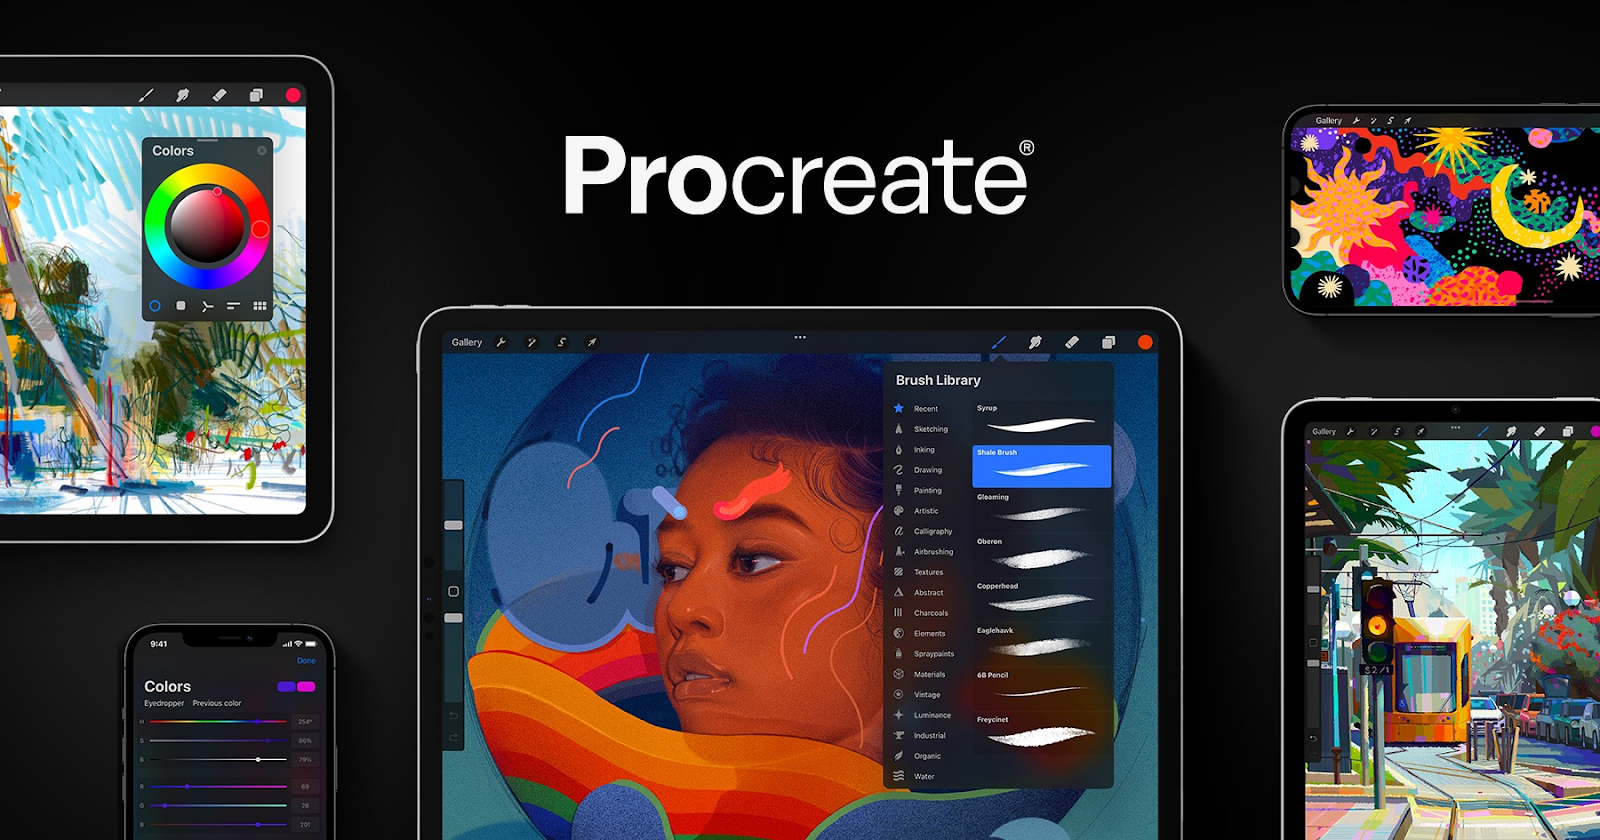 Is Procreate Available on Android?